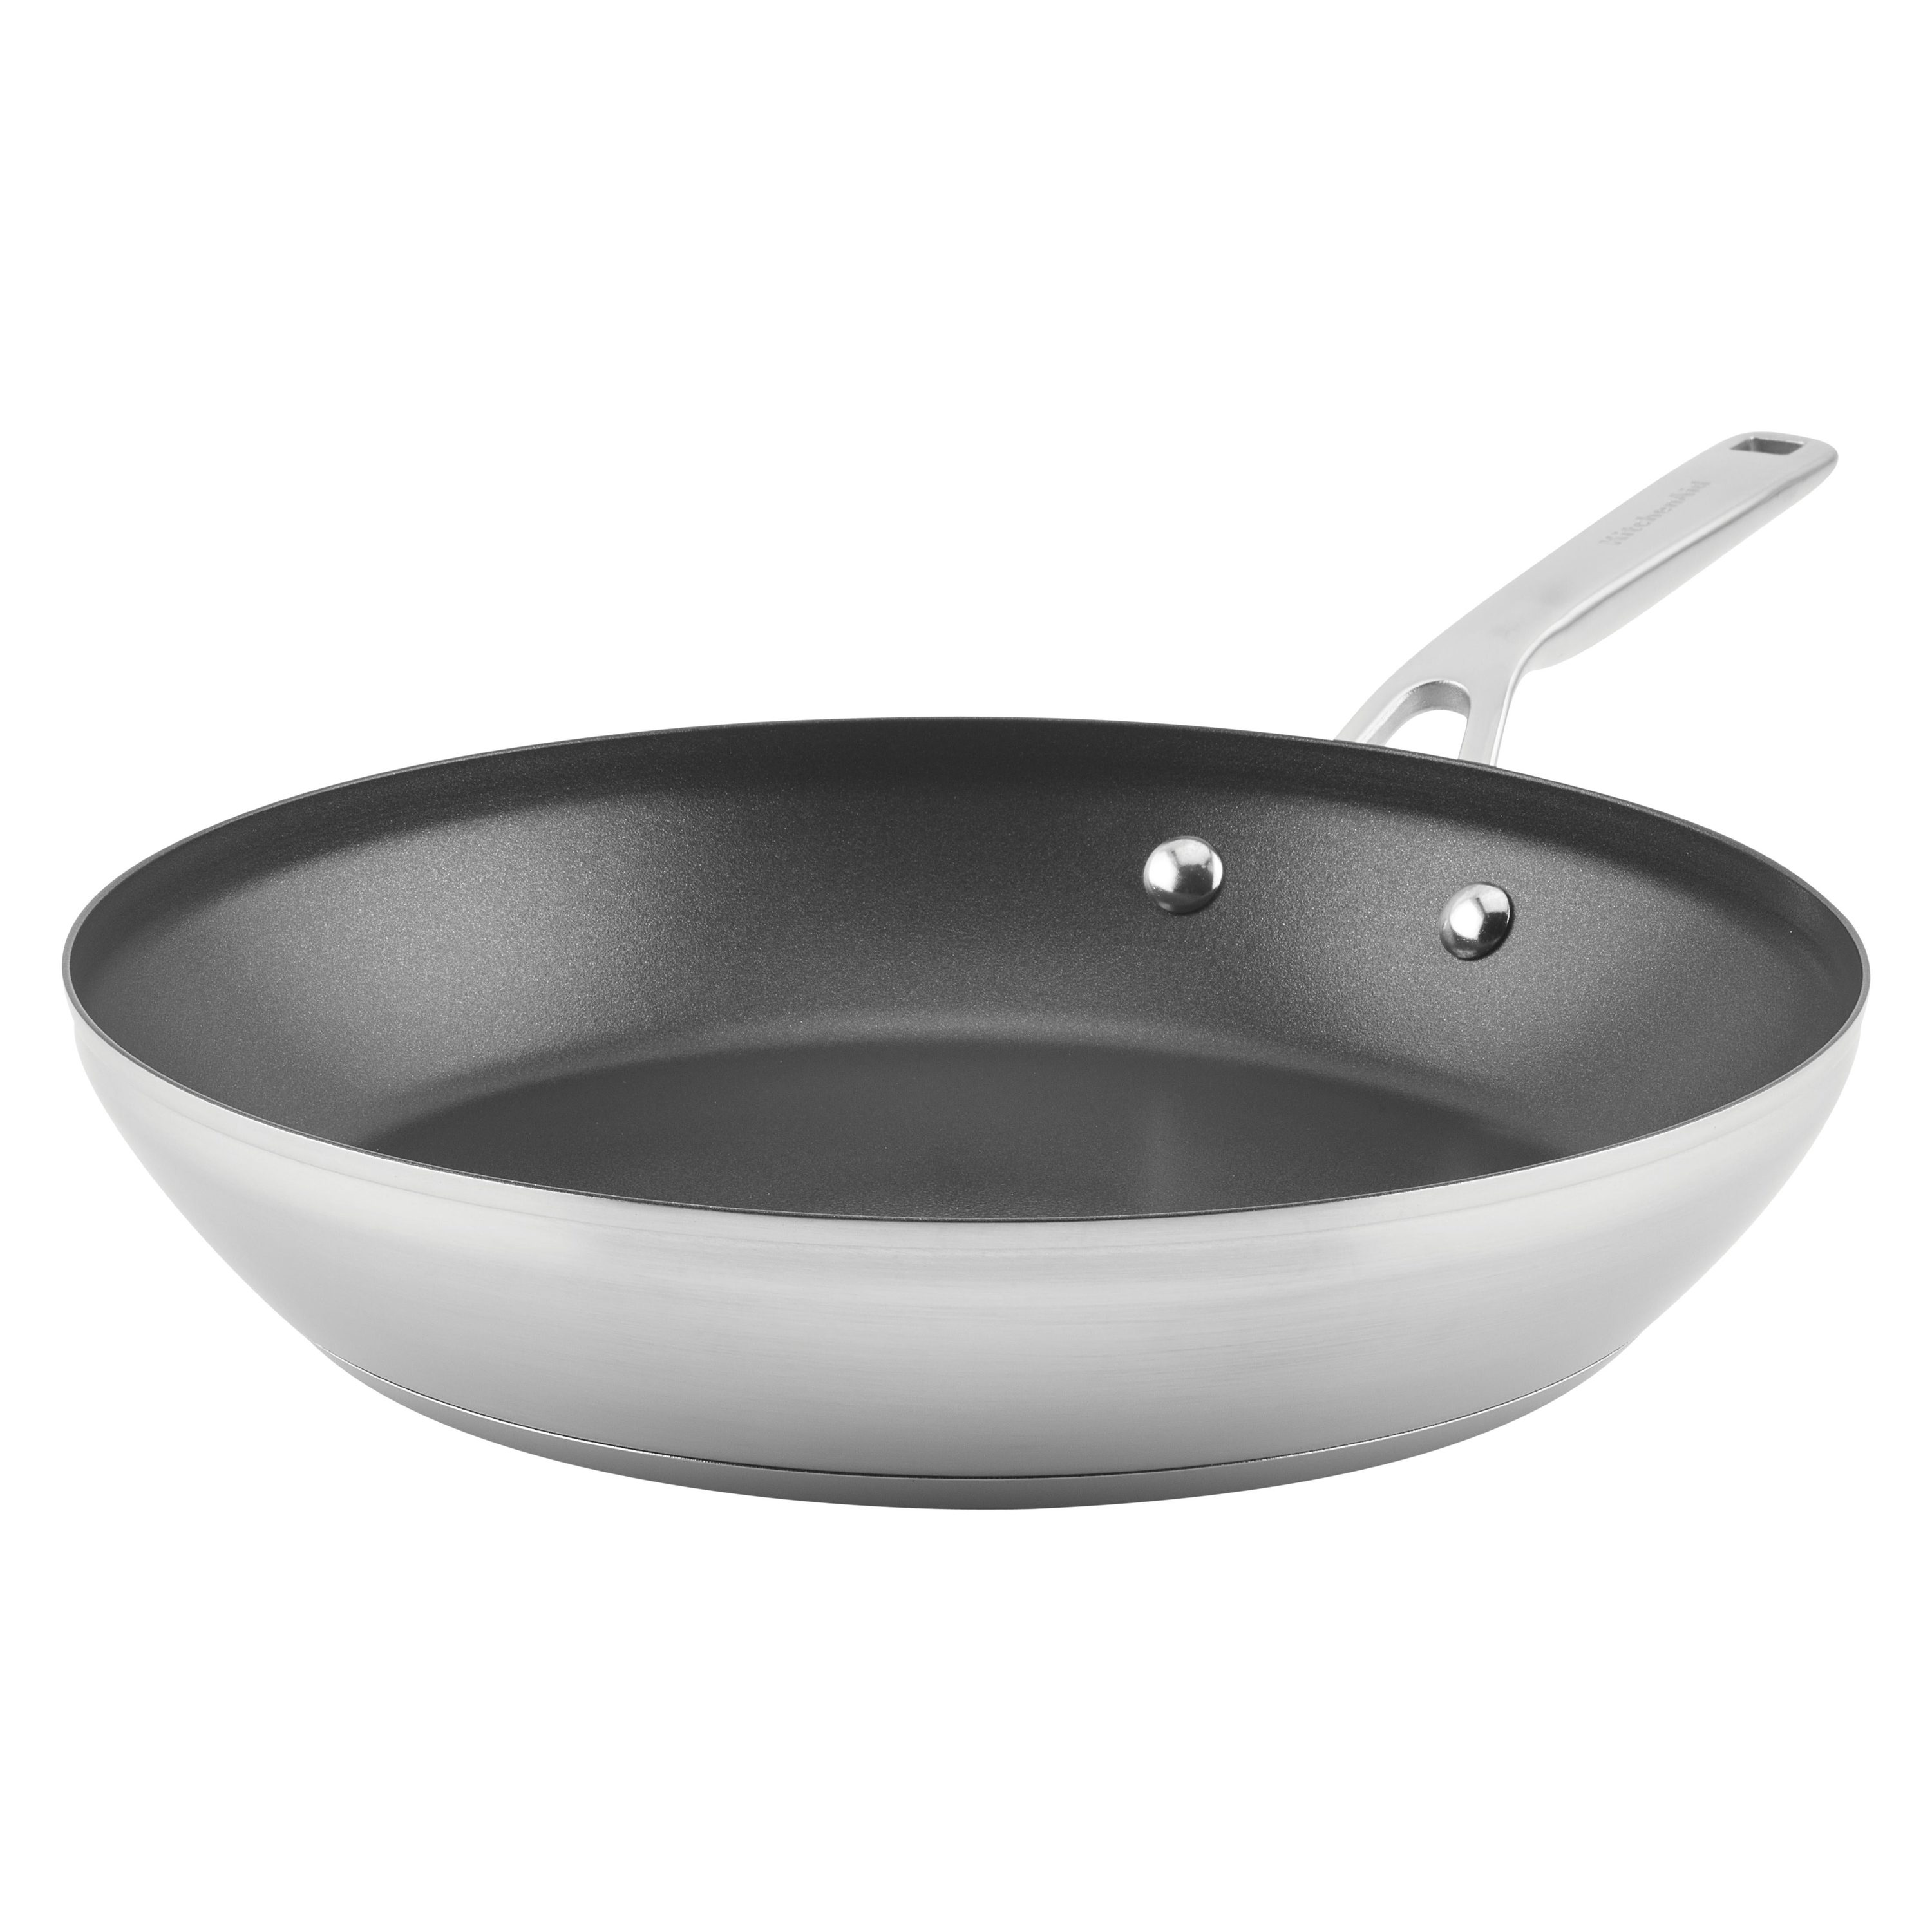 Kitchenaid Fry Pan, Nonstick, Stainless Steel, 3-Ply Base, 12 Inch